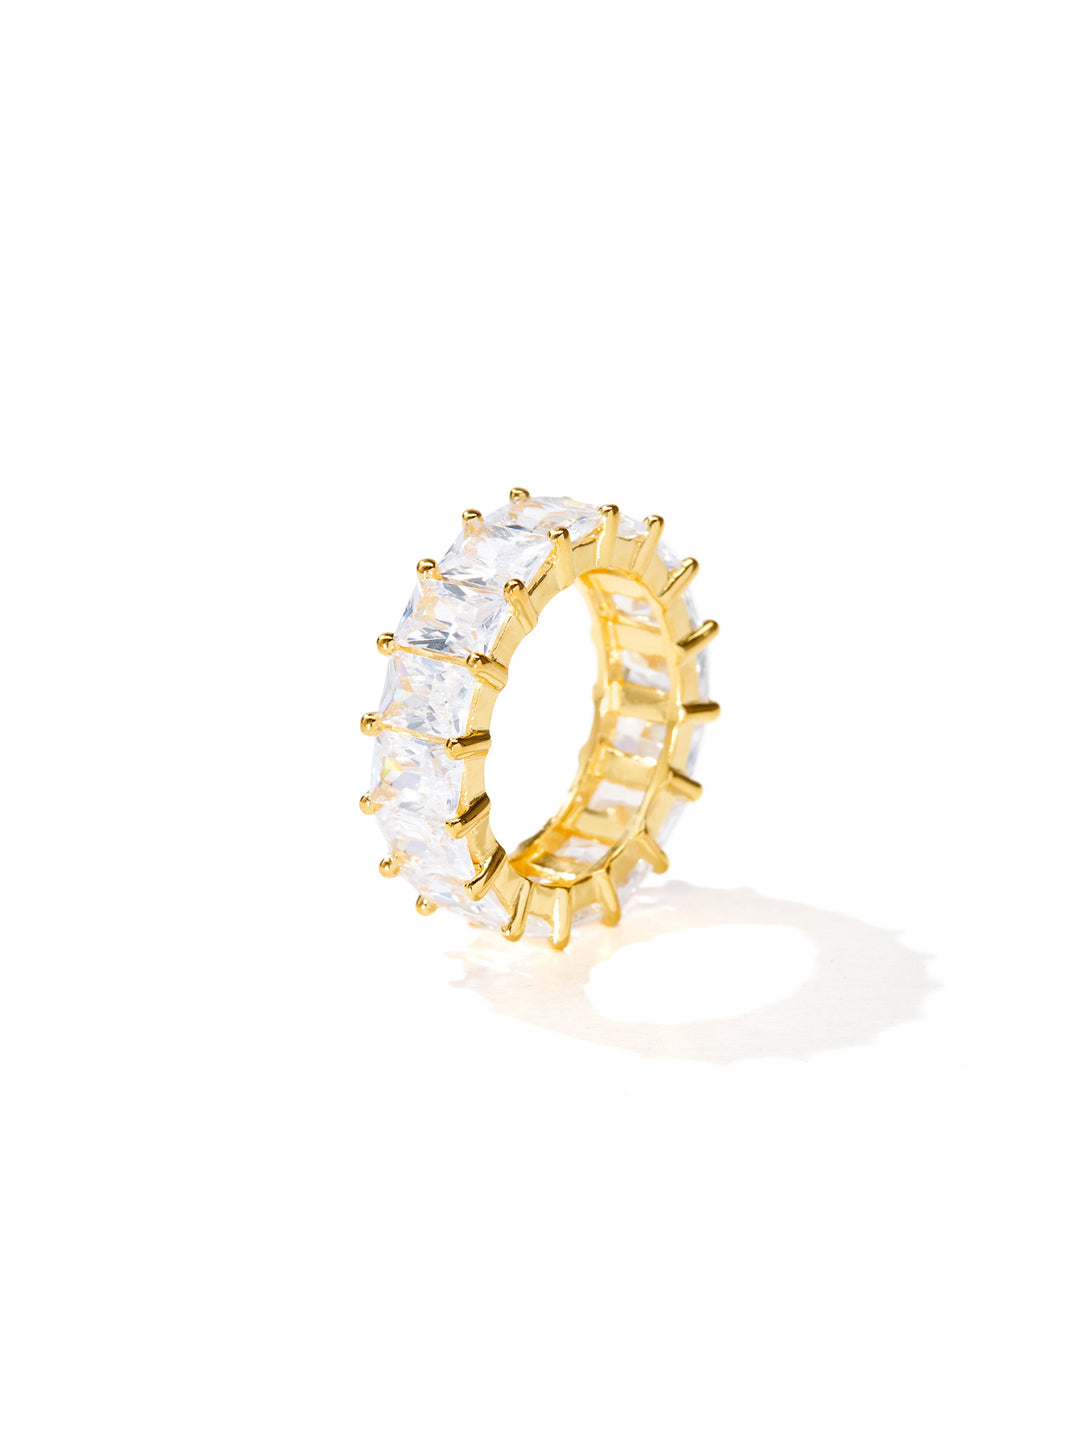 SET - Two STATEMENT Rings, Color: White Gold and 18K Yellow Gold